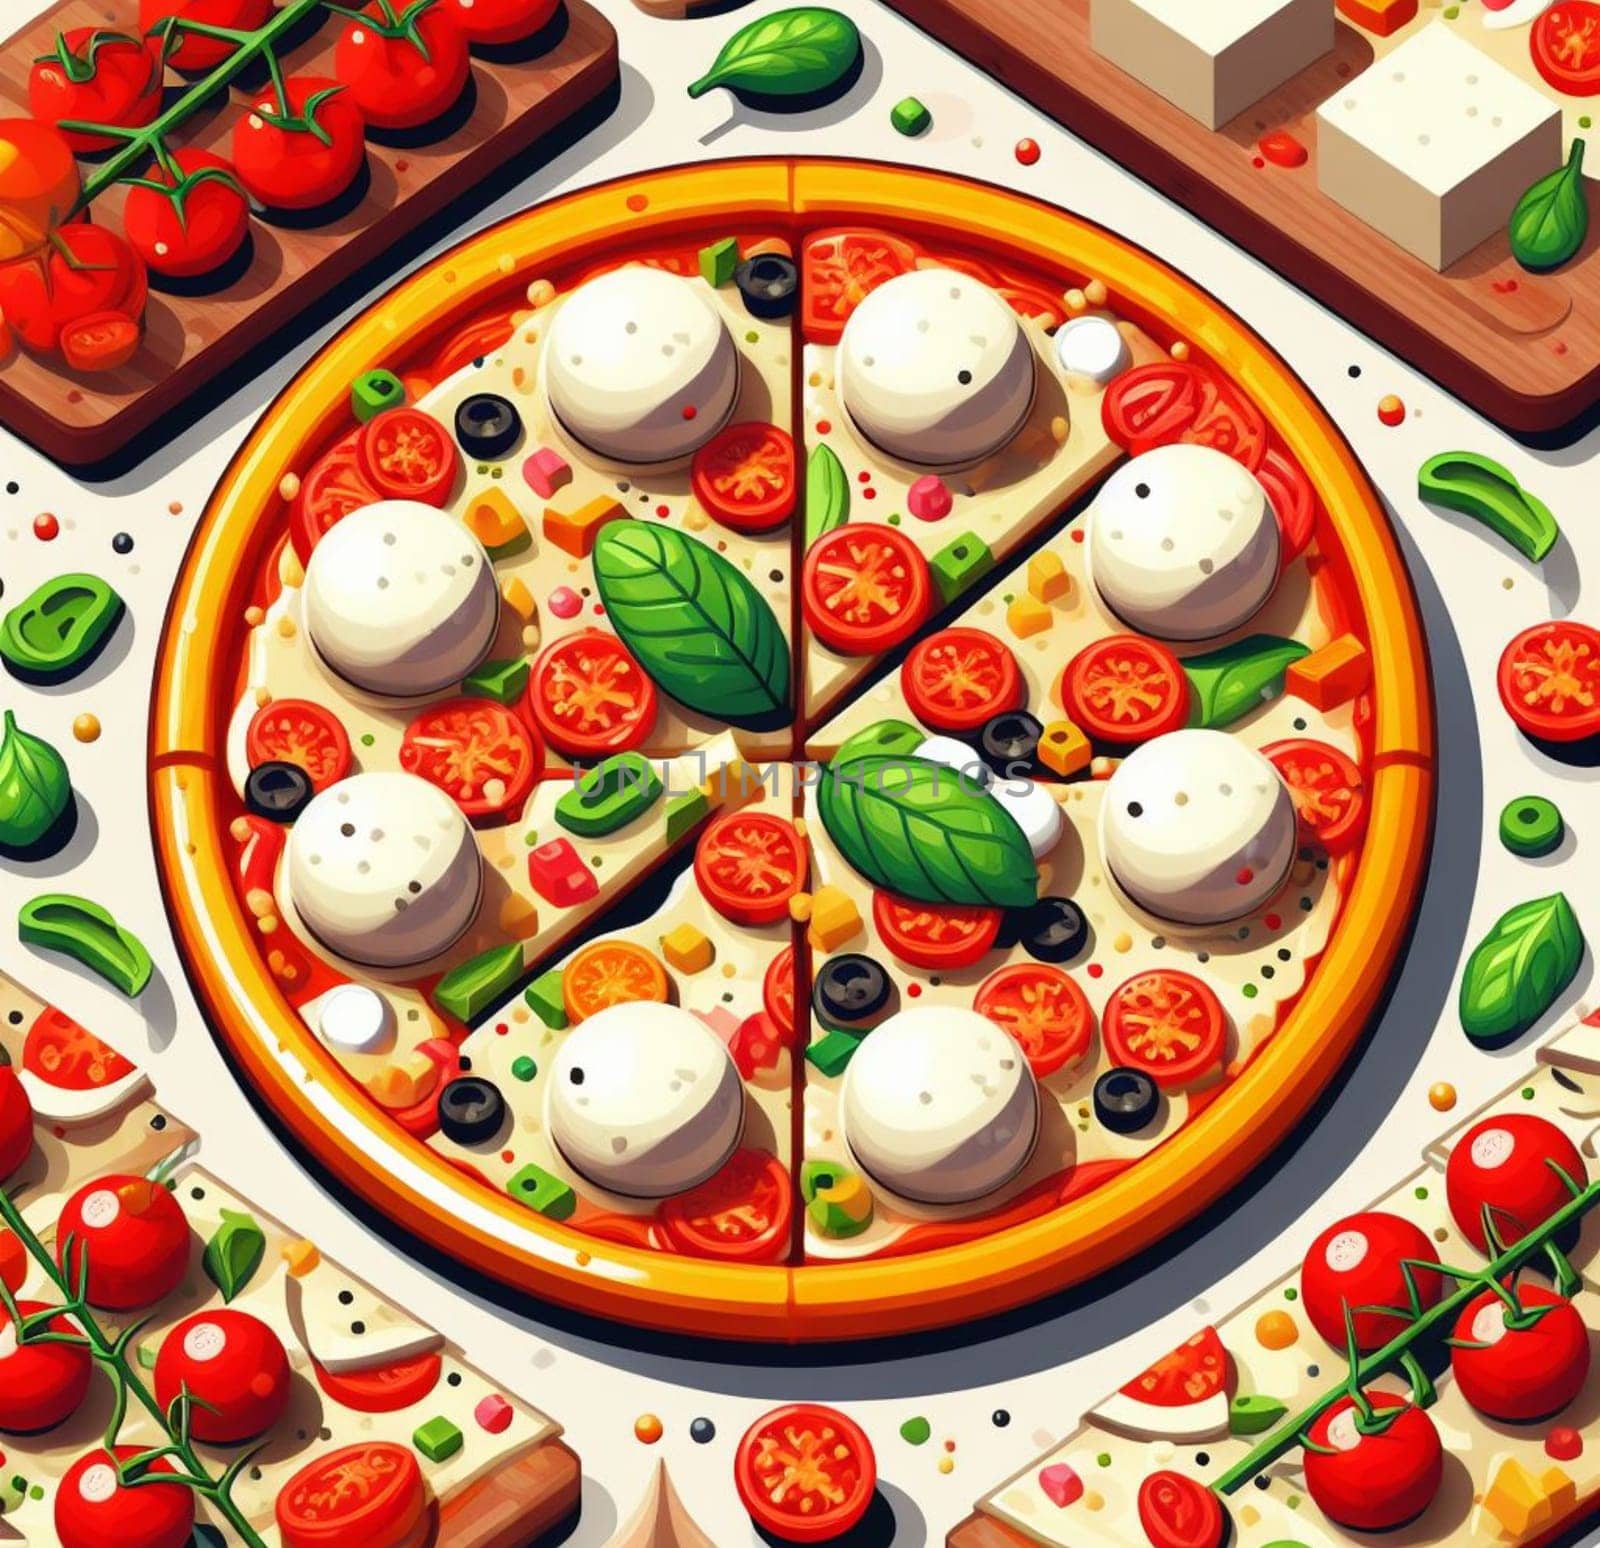 lay flat melted mozzarella cheese tomato and basil pizza ready to eat illustration by verbano